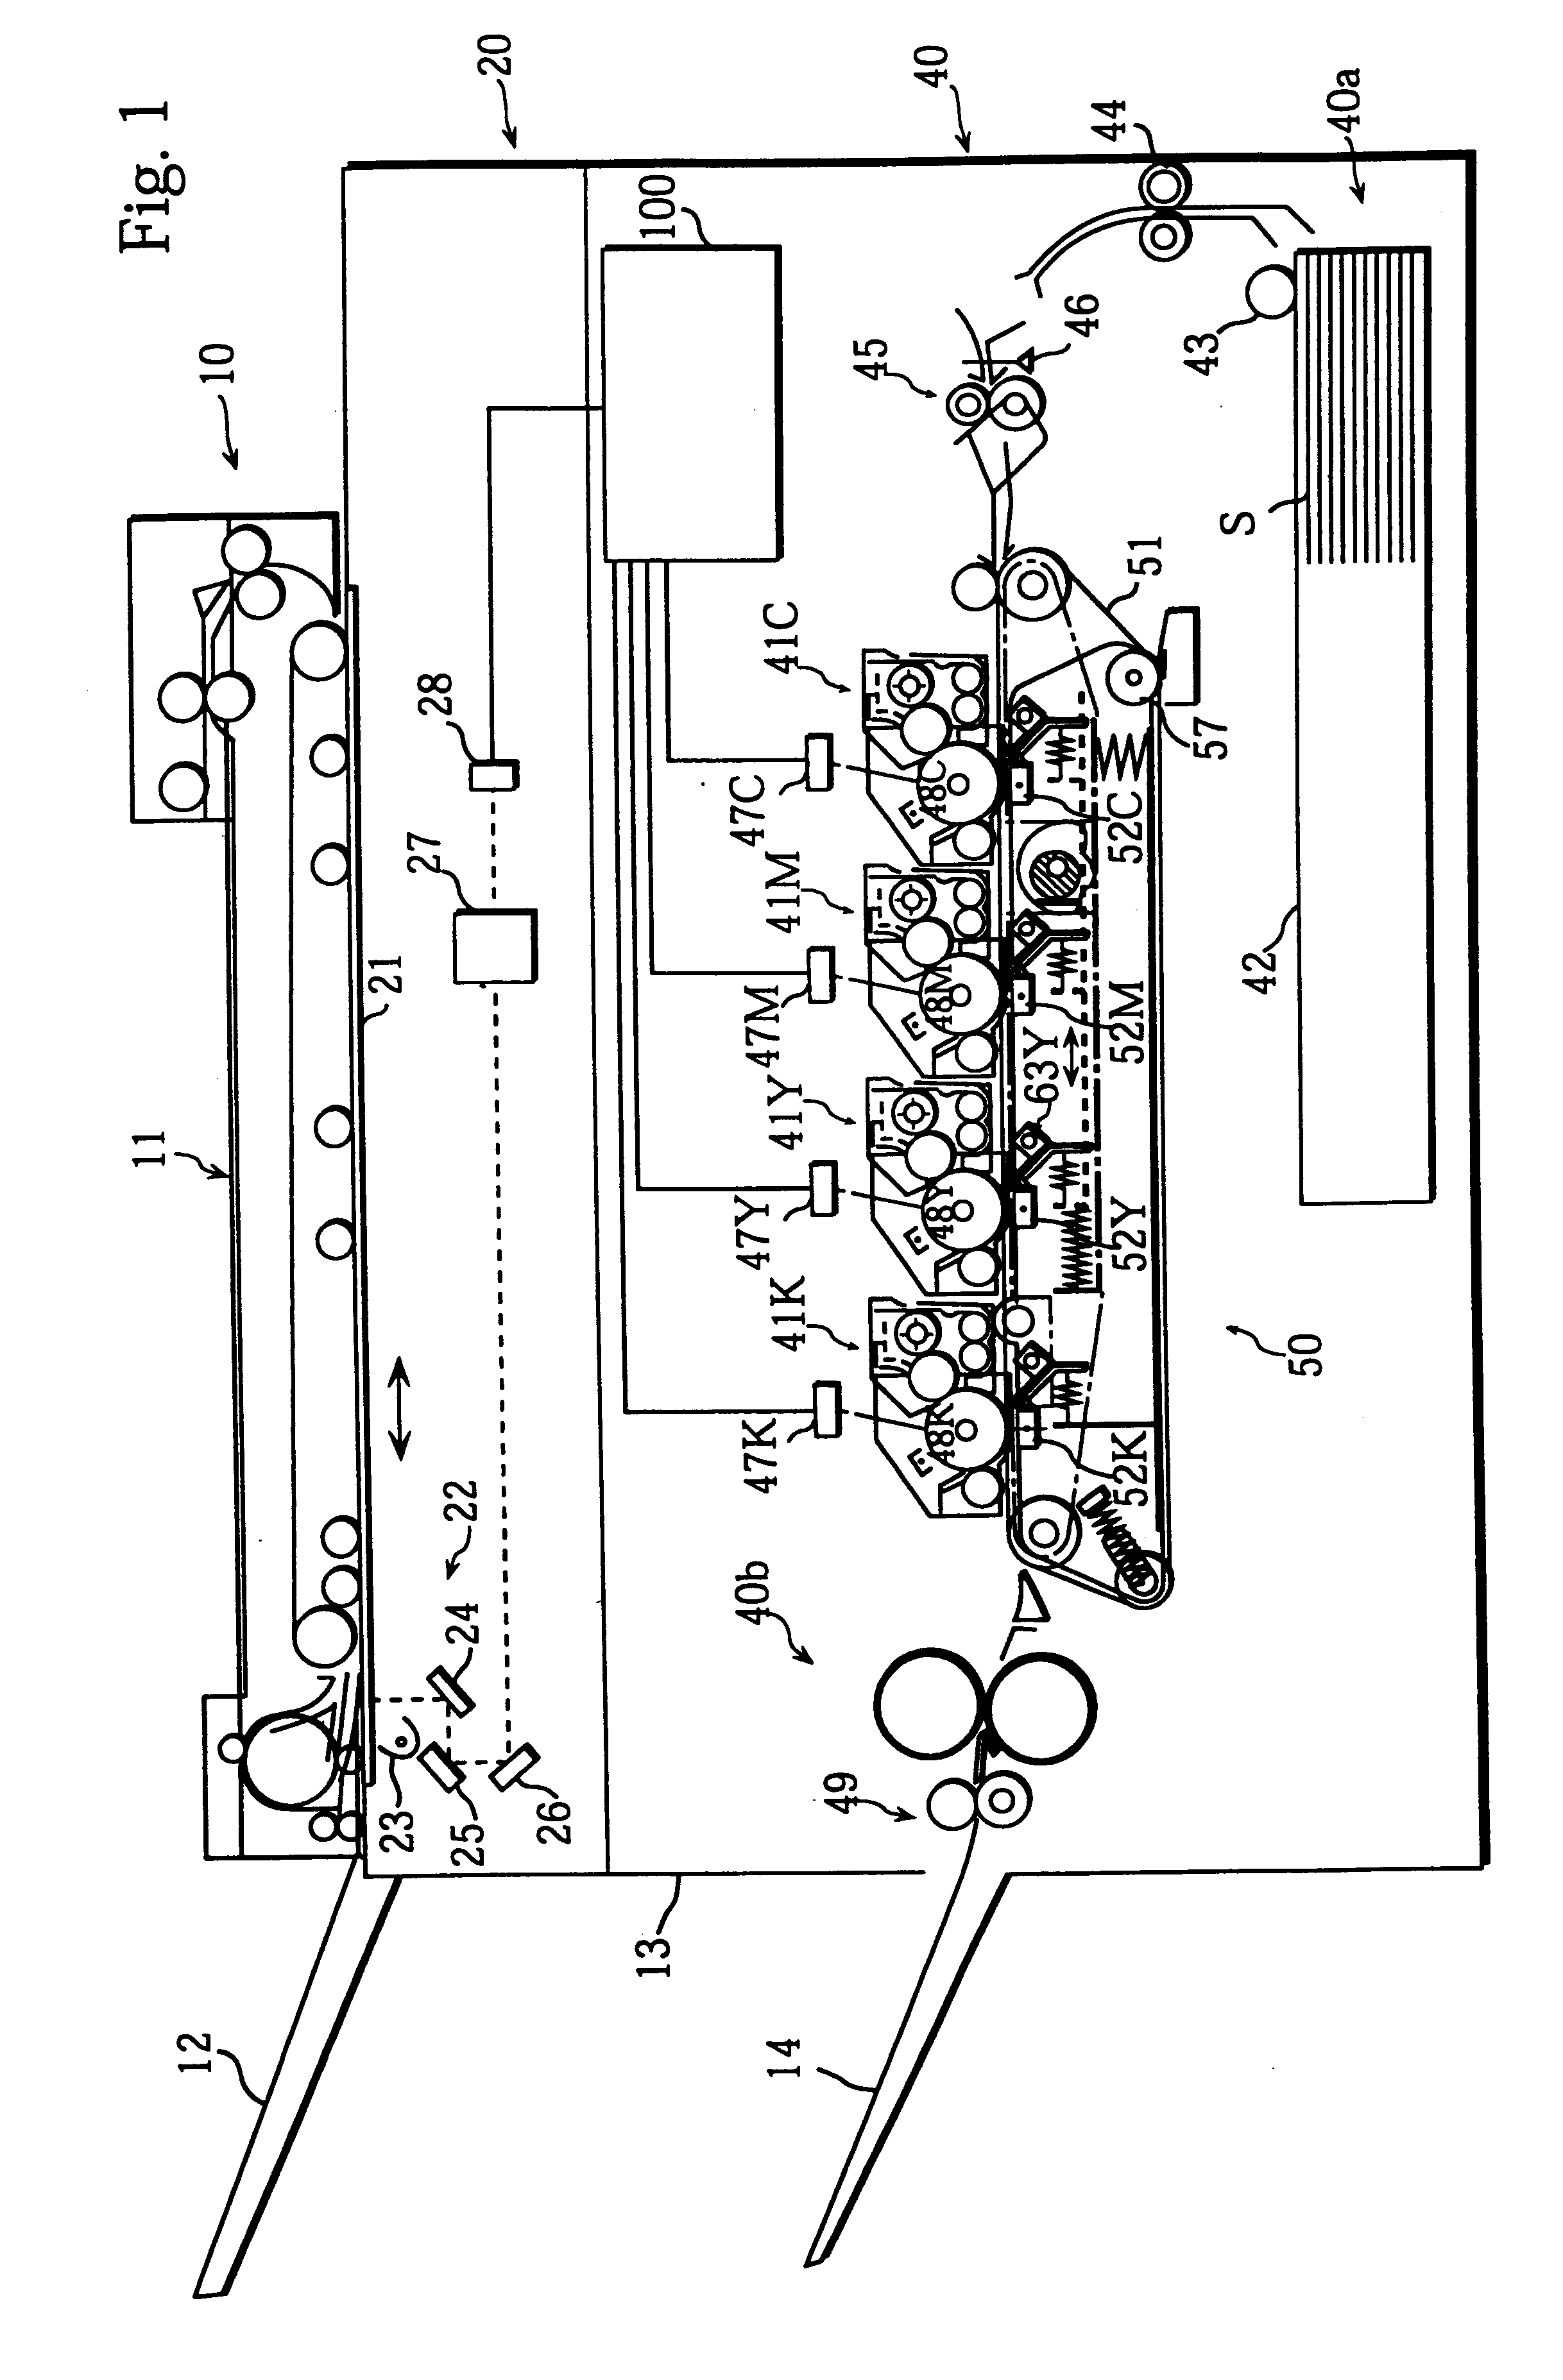 Image forming apparatus provided with a plurality of image holding components